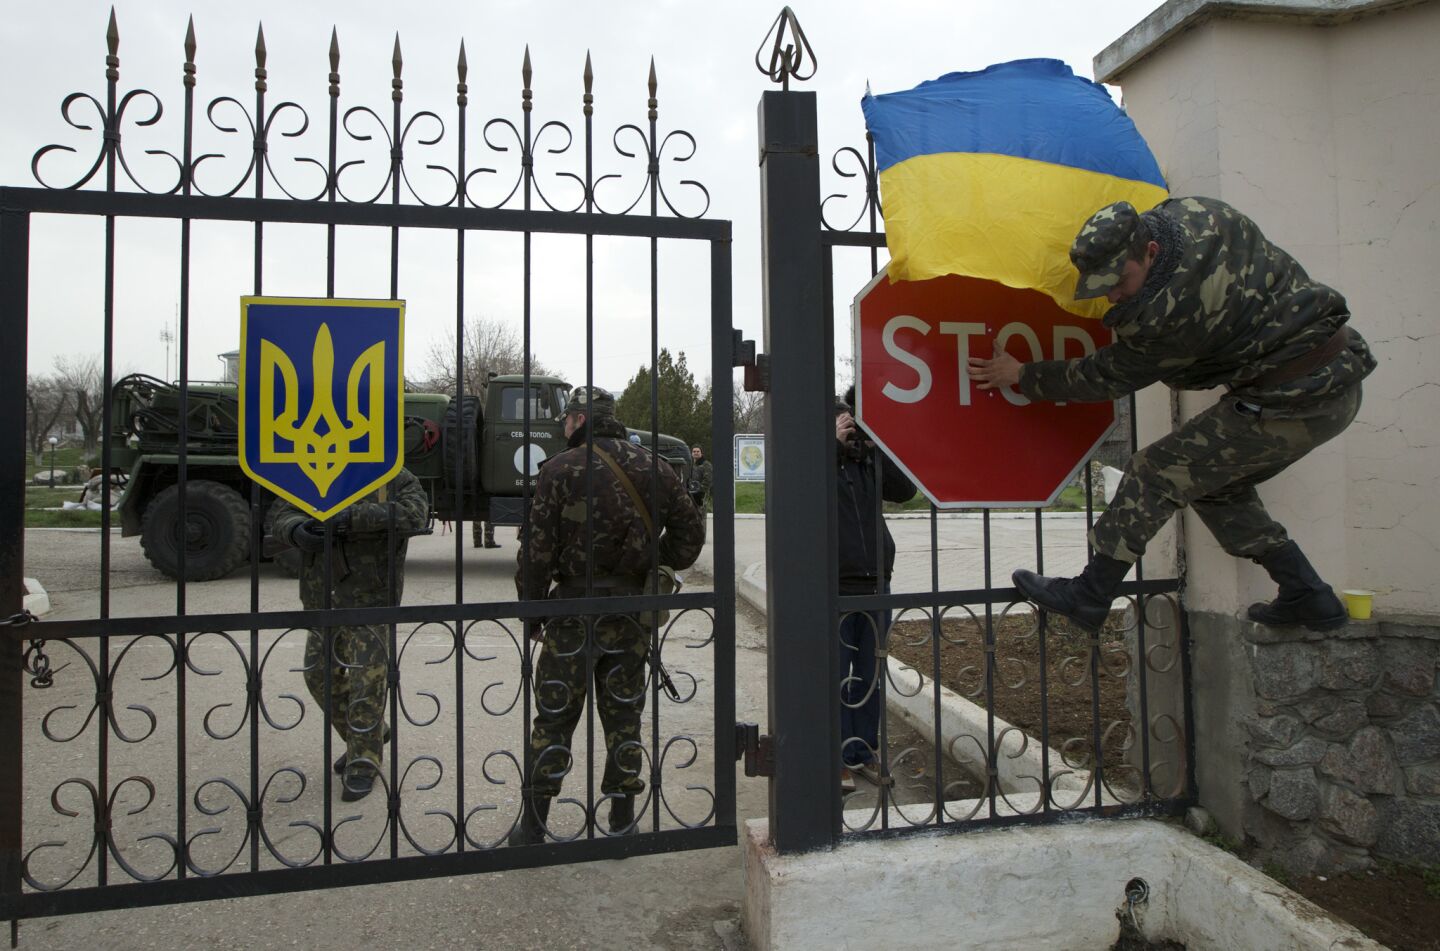 A Ukrainian airman puts the national flag over the gate as they guard what's left under their control at the Belbek air base, outside Sevastopol, Ukraine.